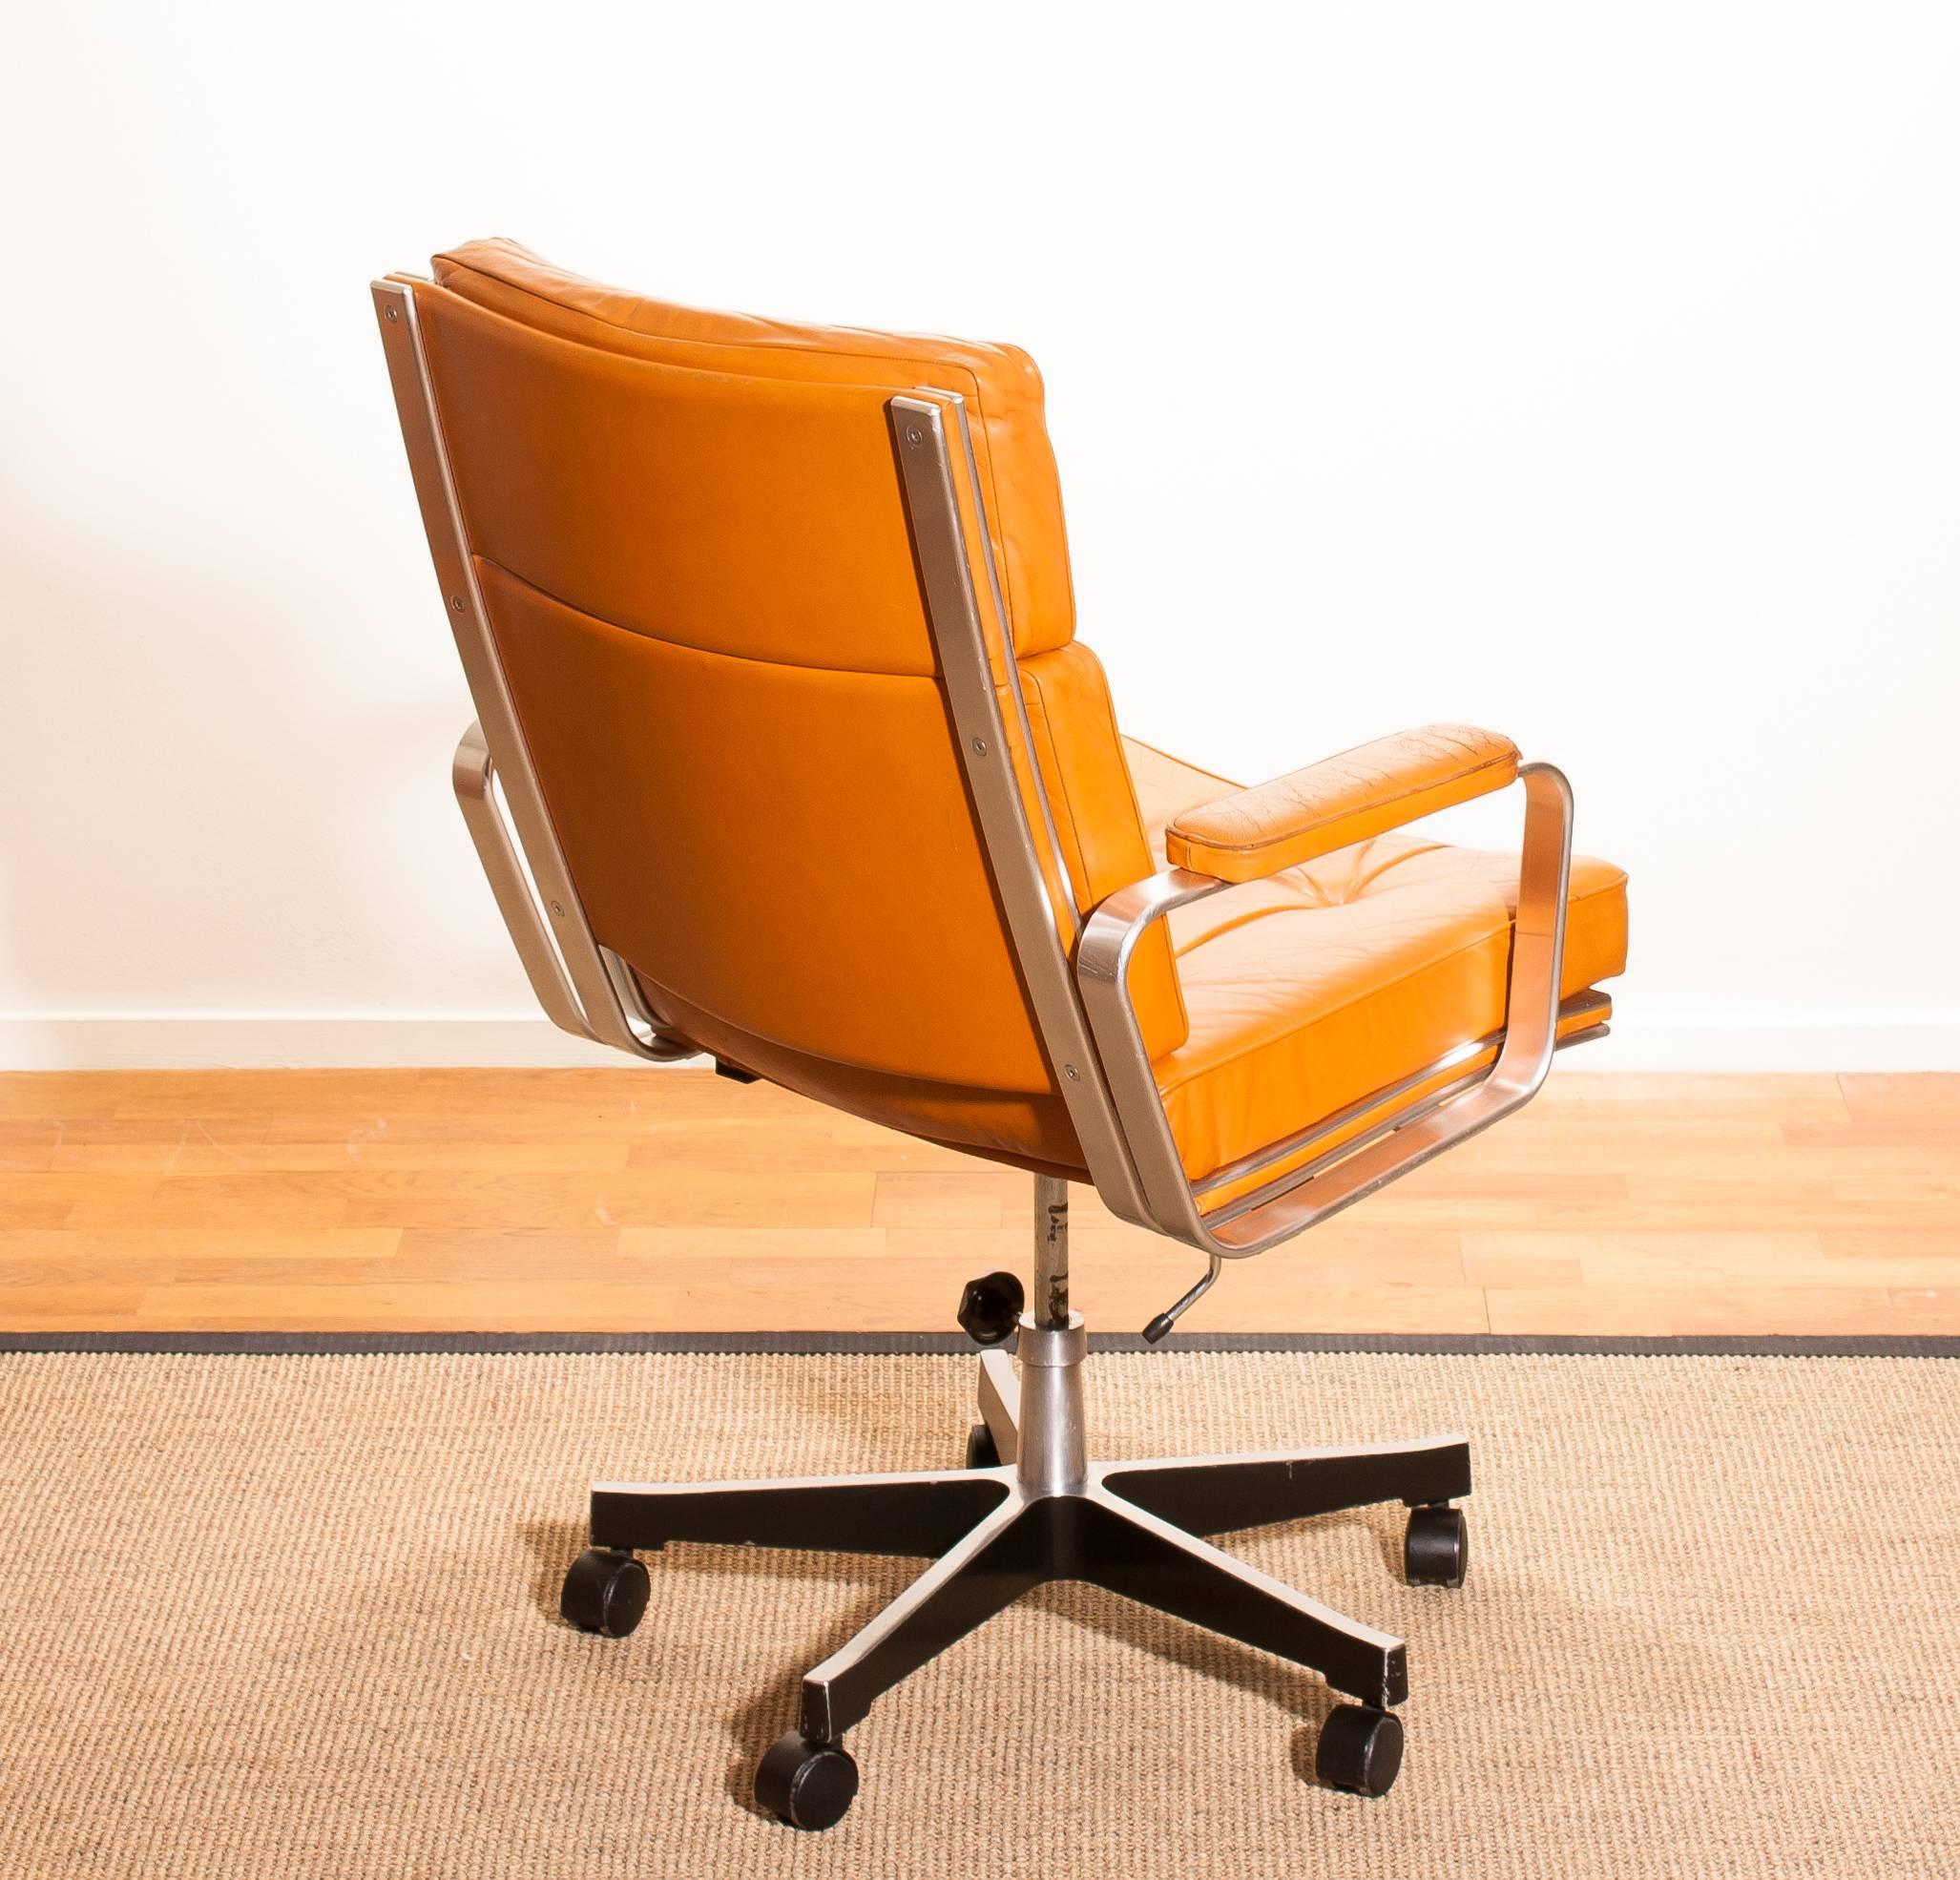 Late 20th Century 1970s, Leather and Aluminium Desk Chair by Karl Erik Ekselius